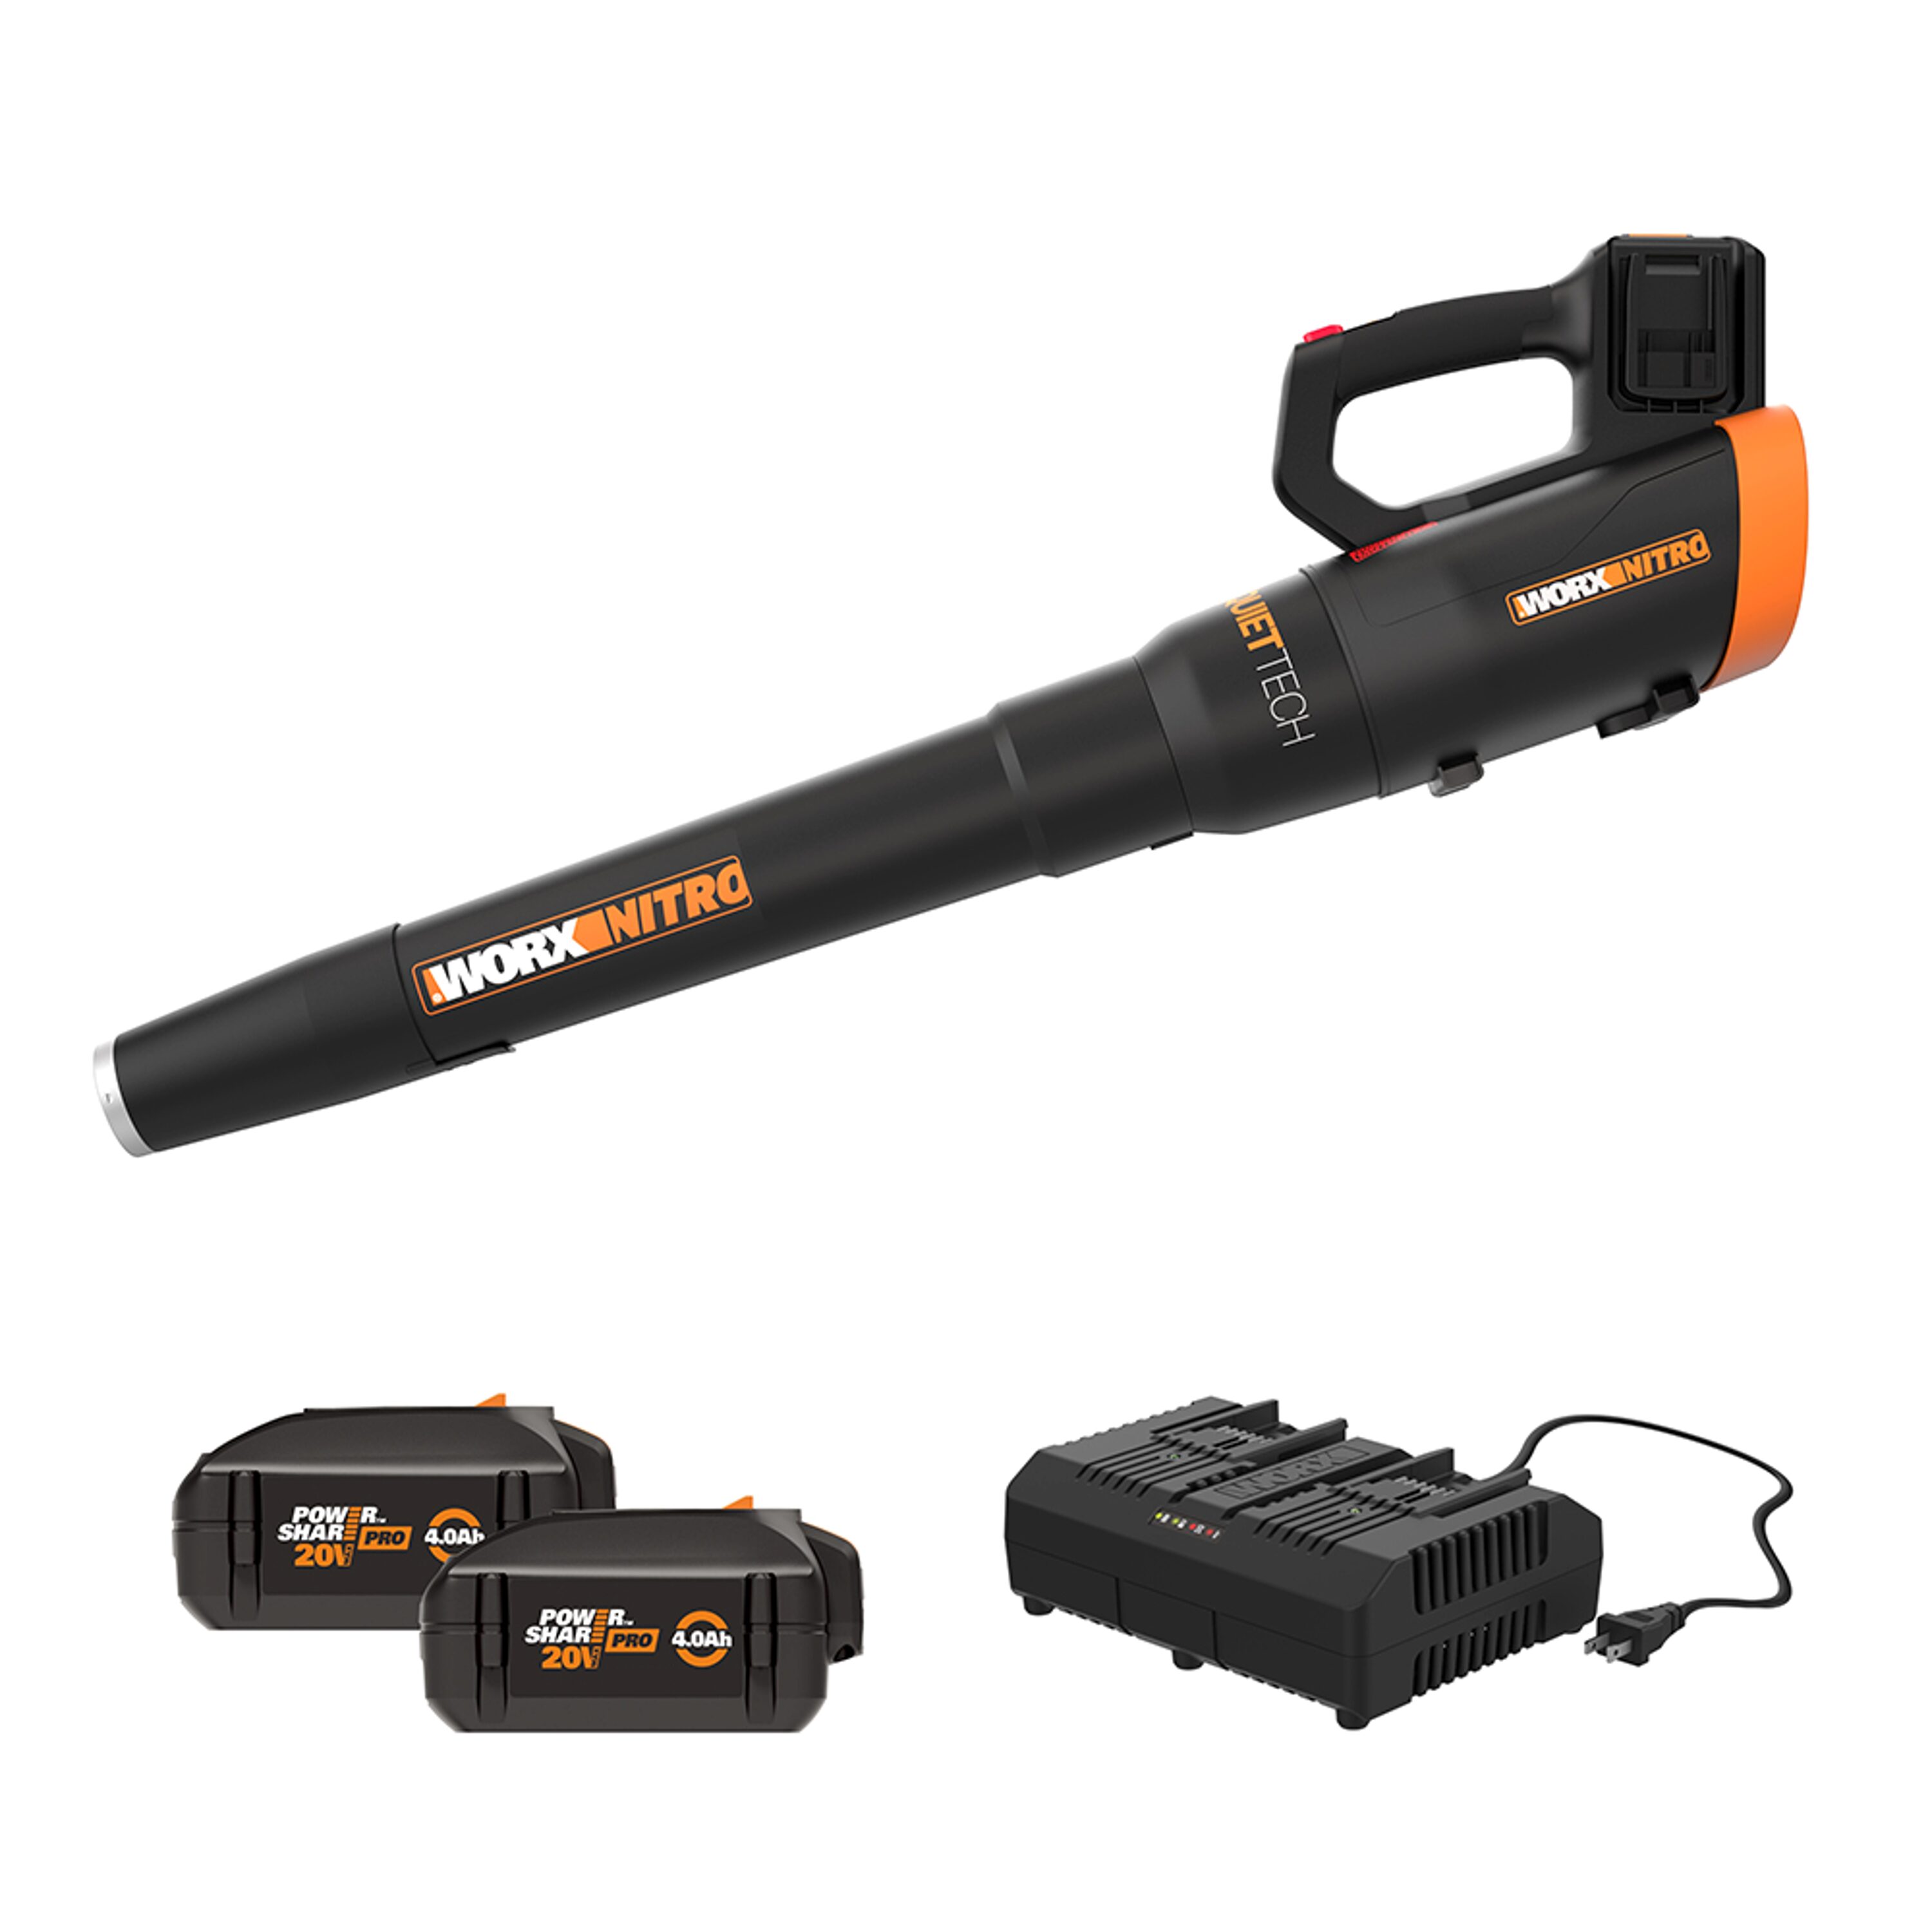 WORX NITRO POWER SHARE Quiet Tech 40-volt 530-CFM 180-MPH Battery Handheld  Leaf Blower 4 Ah (Battery and Charger Included)